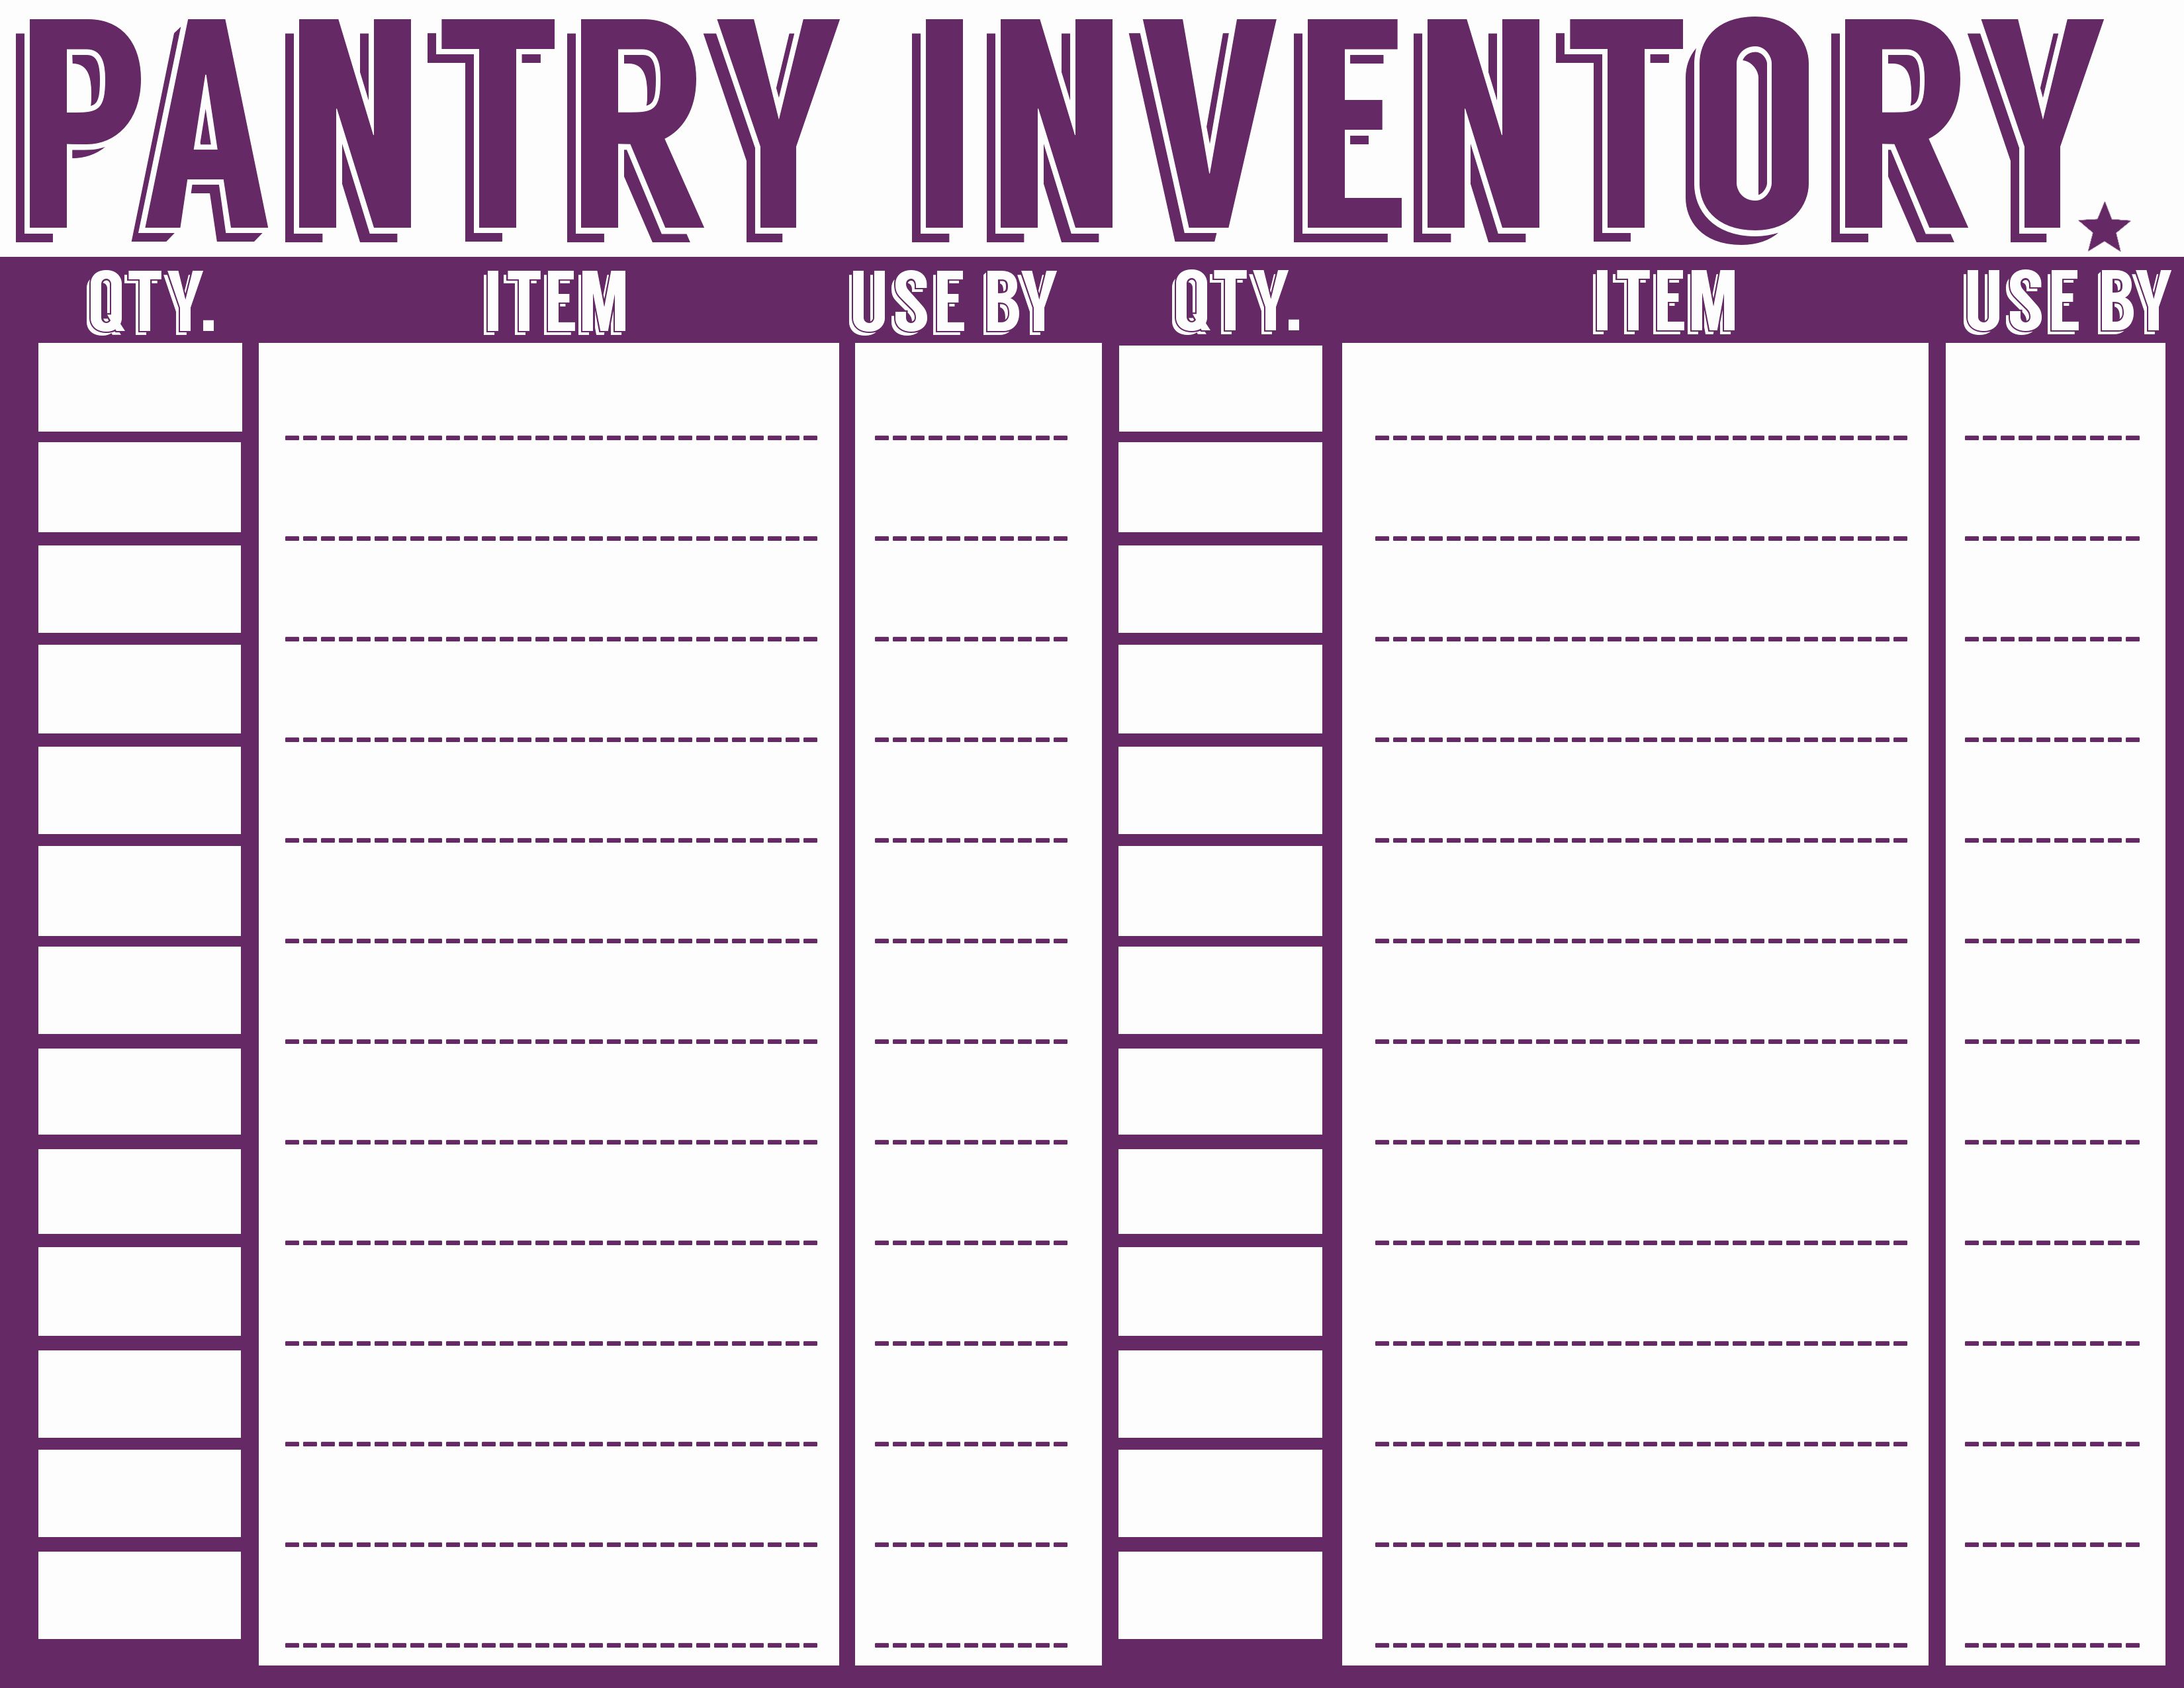 Food Inventory List Template Awesome Free Printable Menu Planner Shopping List &amp; Inventory Sheets